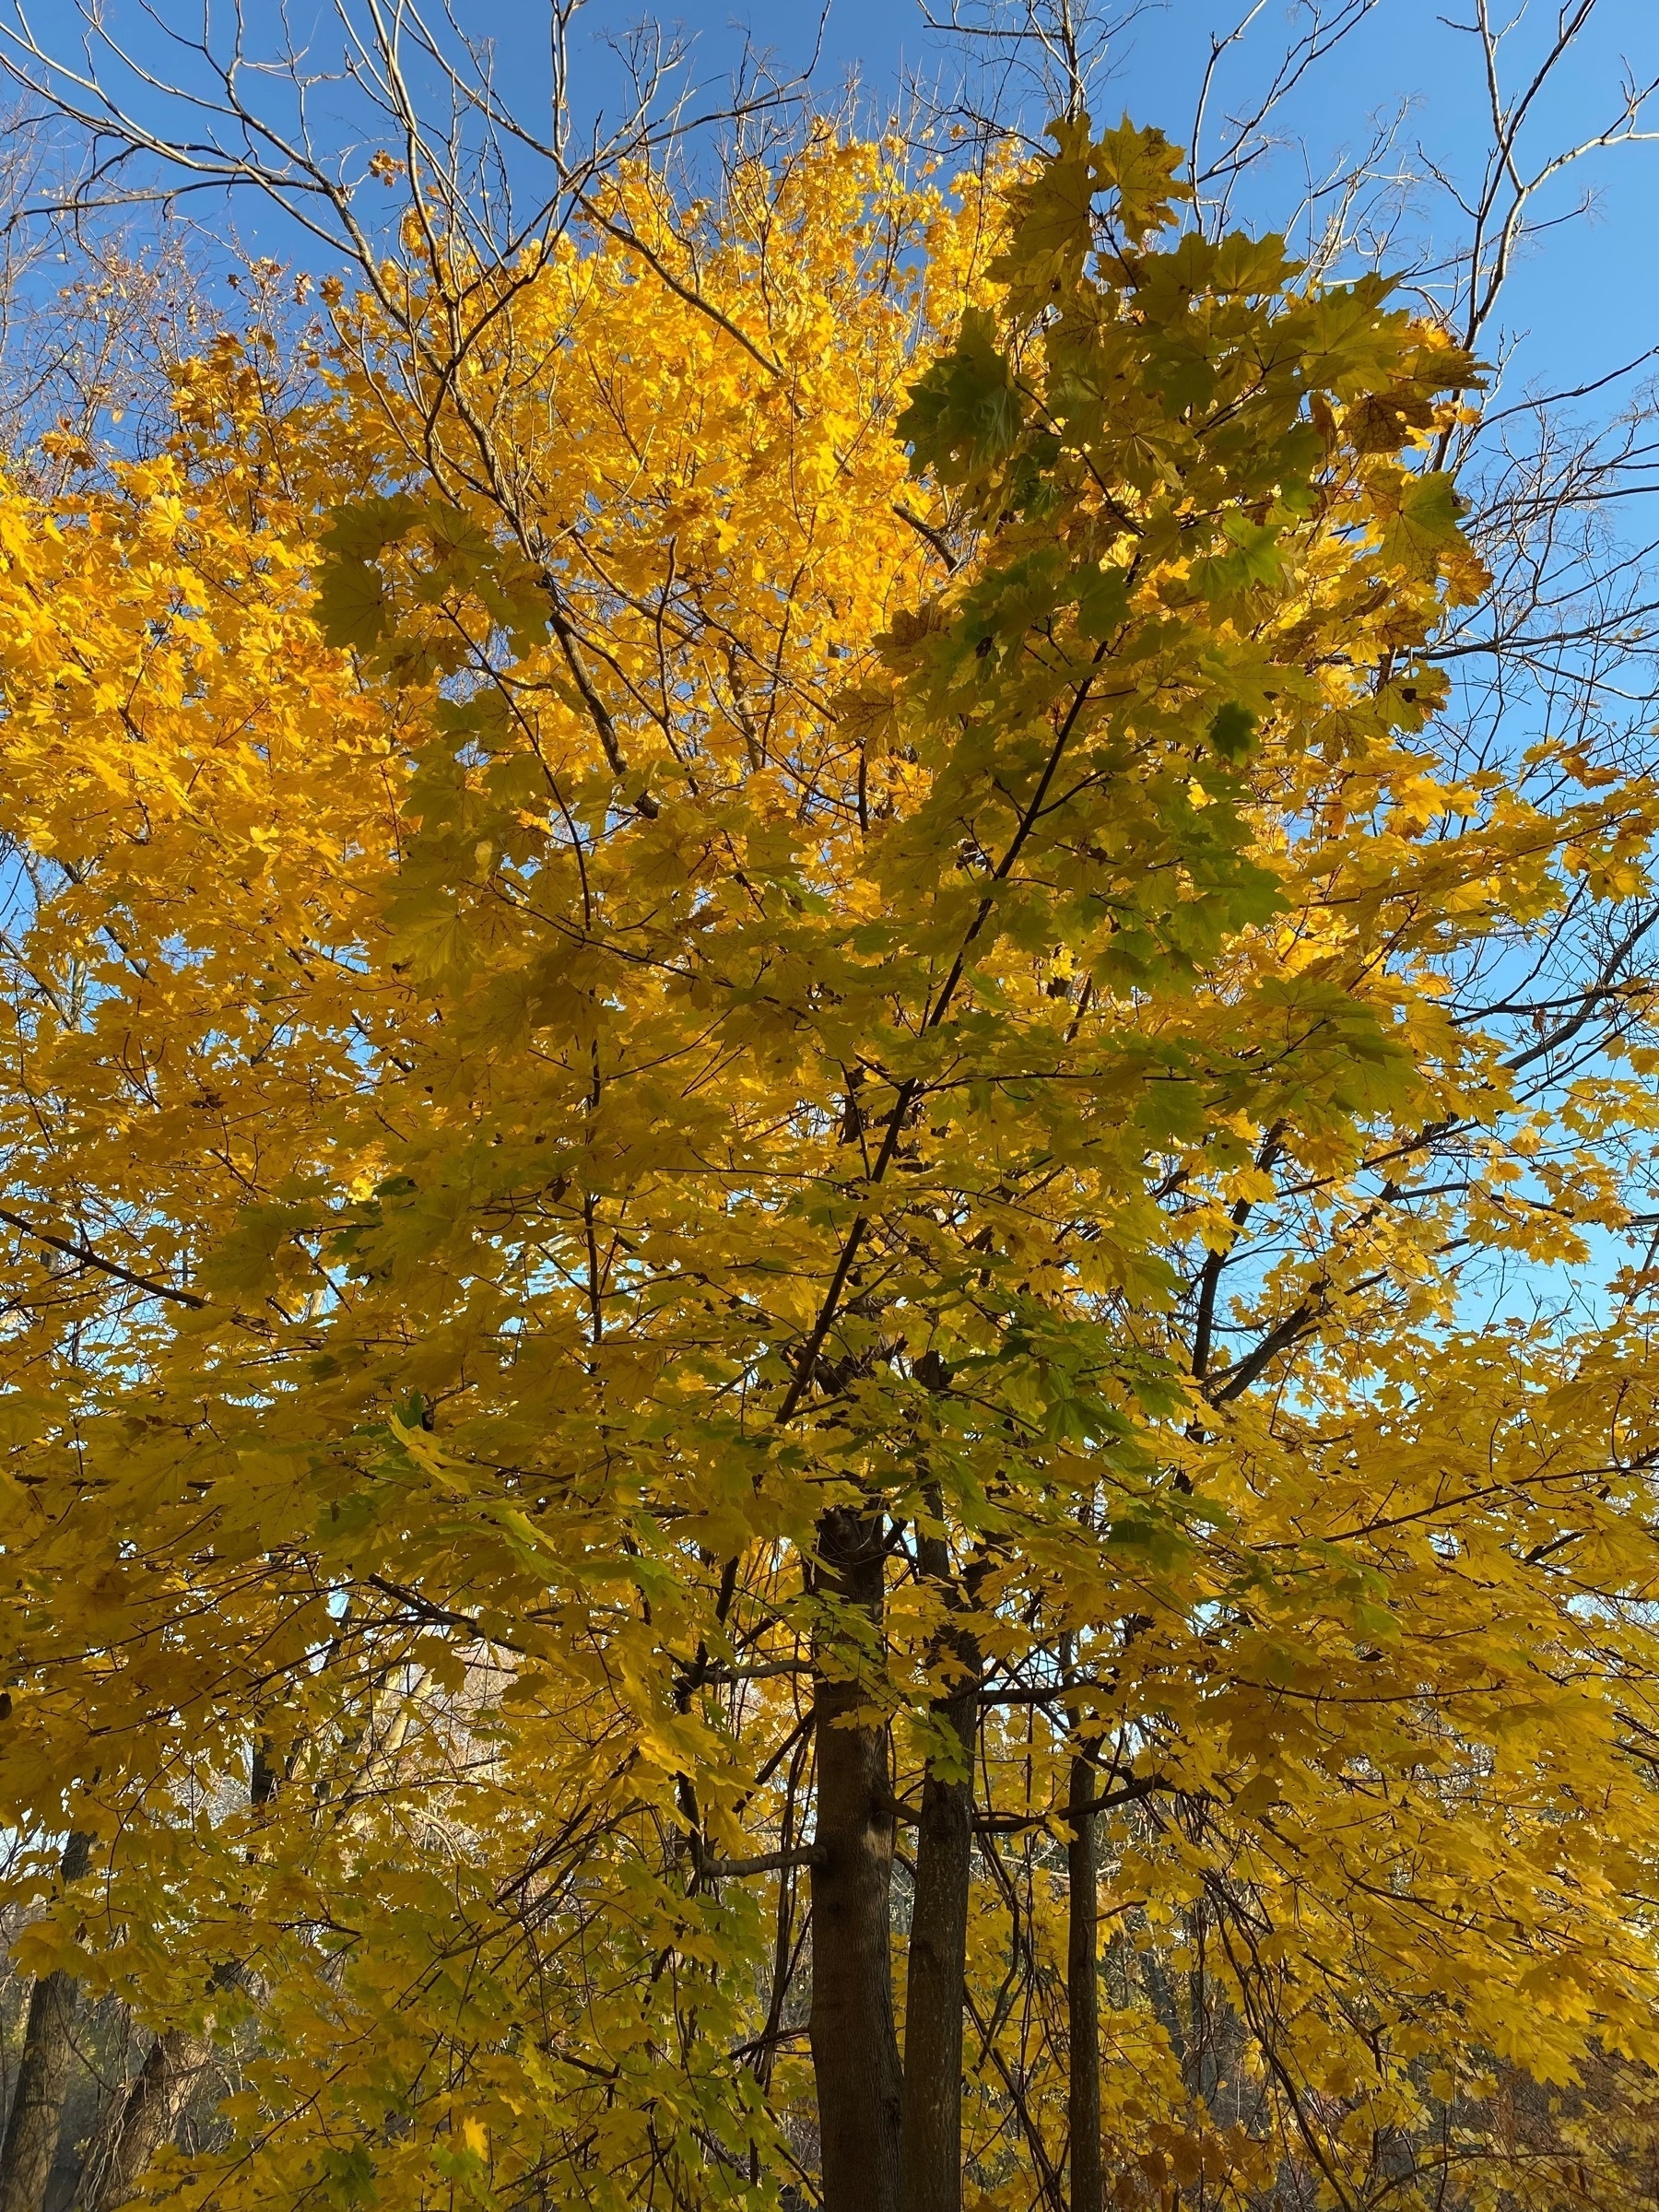 View of a tree with bright yellow fall foliage.